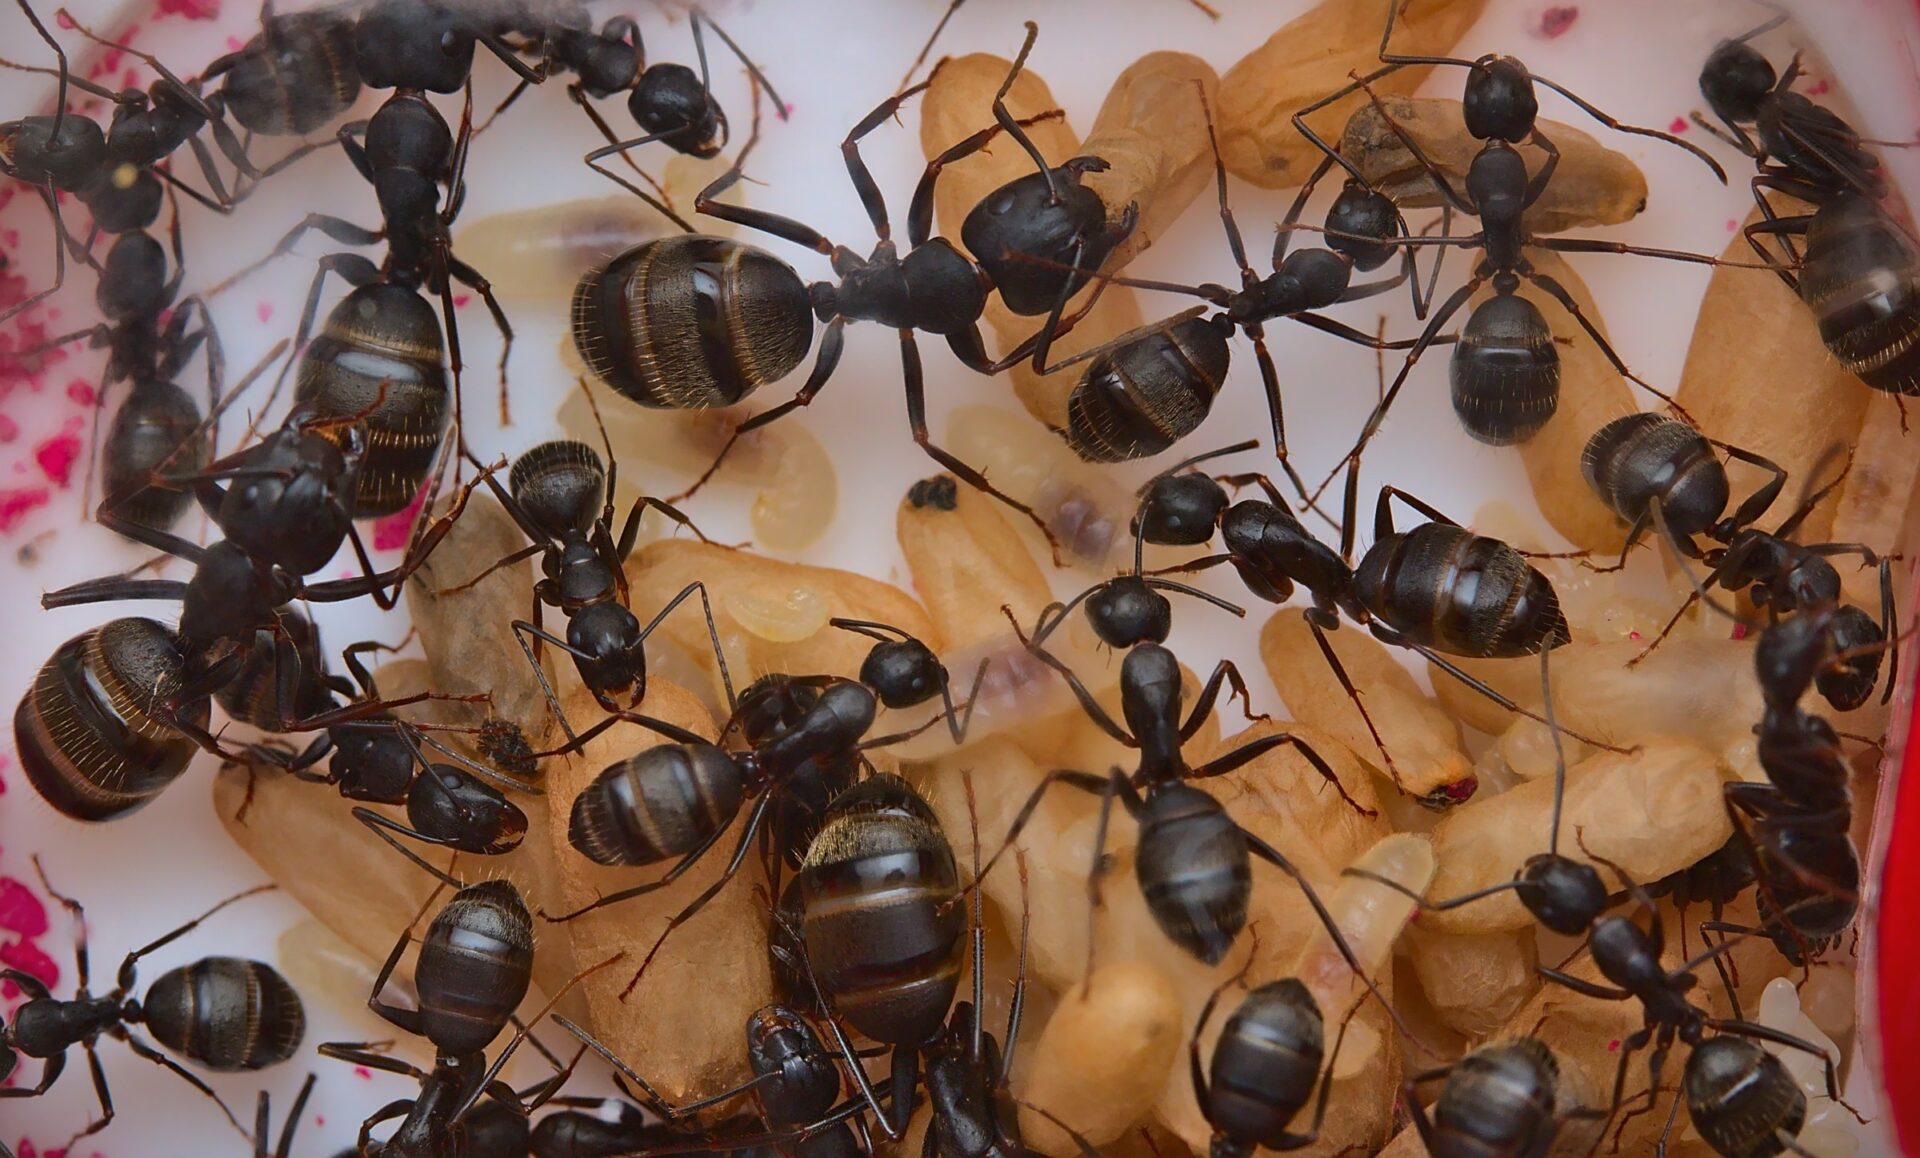 Camponotus pennsylvanicus workers caring for brood.